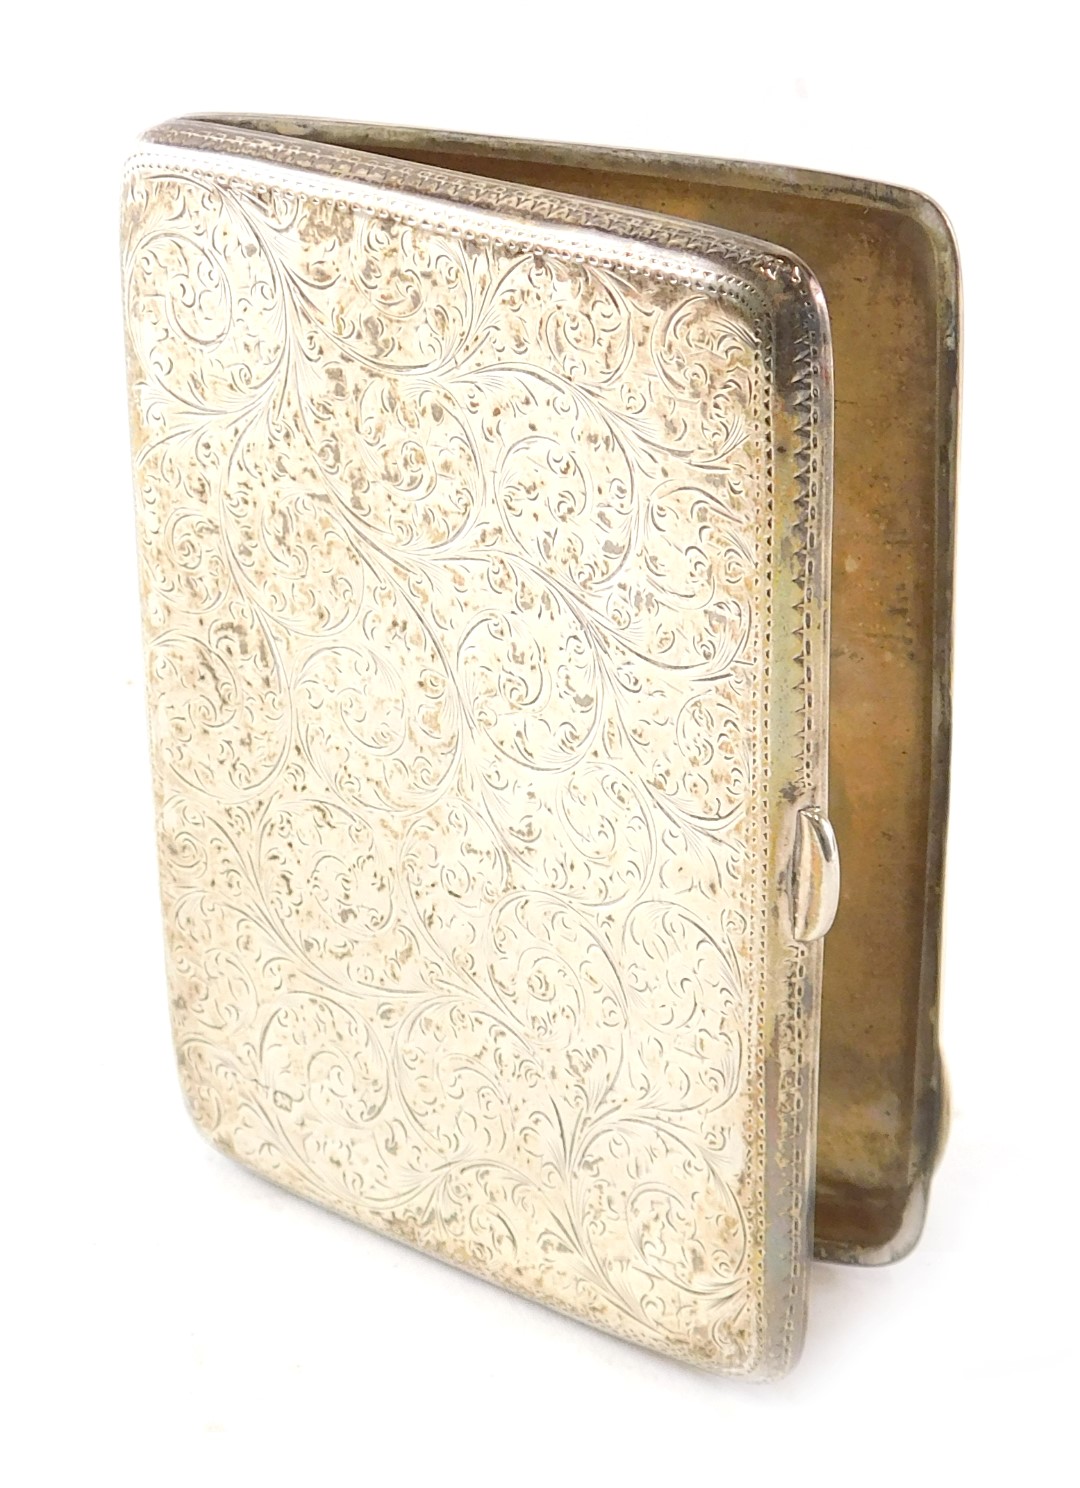 A silver cigarette case, with engraved foliate scroll decoration, hallmarks for Sheffield indistinct